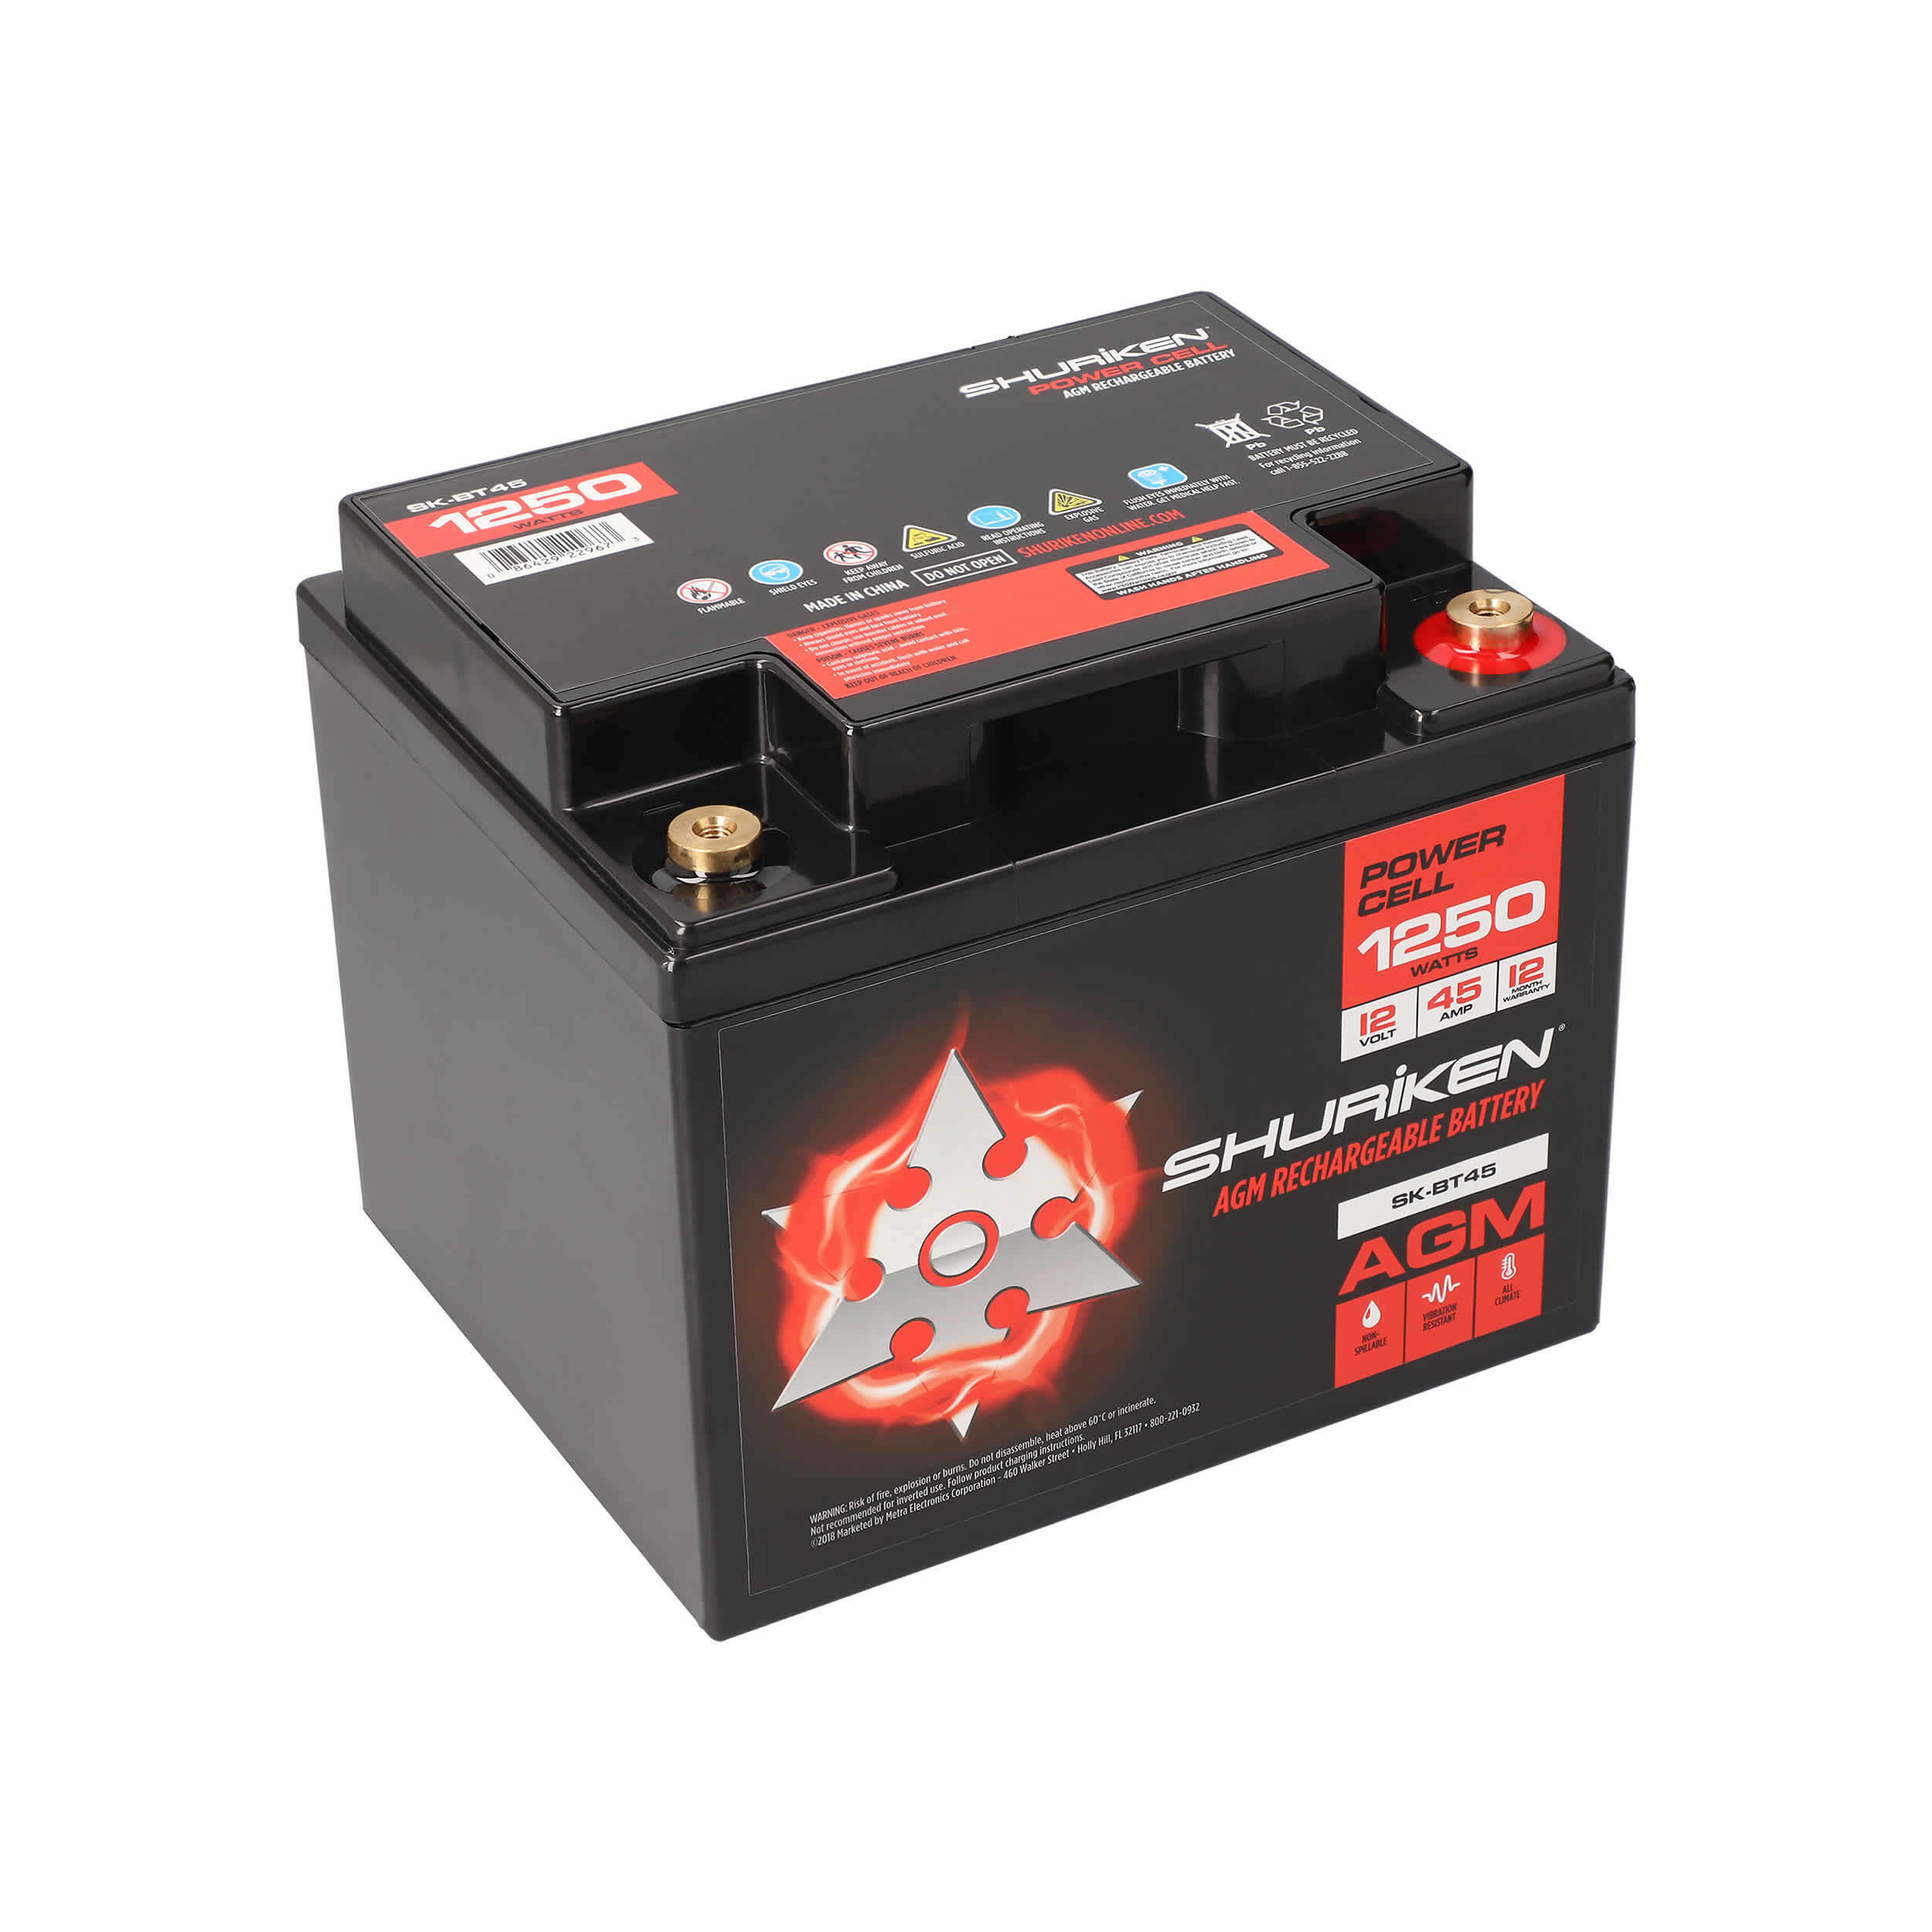 1250W 45AMP Hours Compact Size AGM 12V Battery